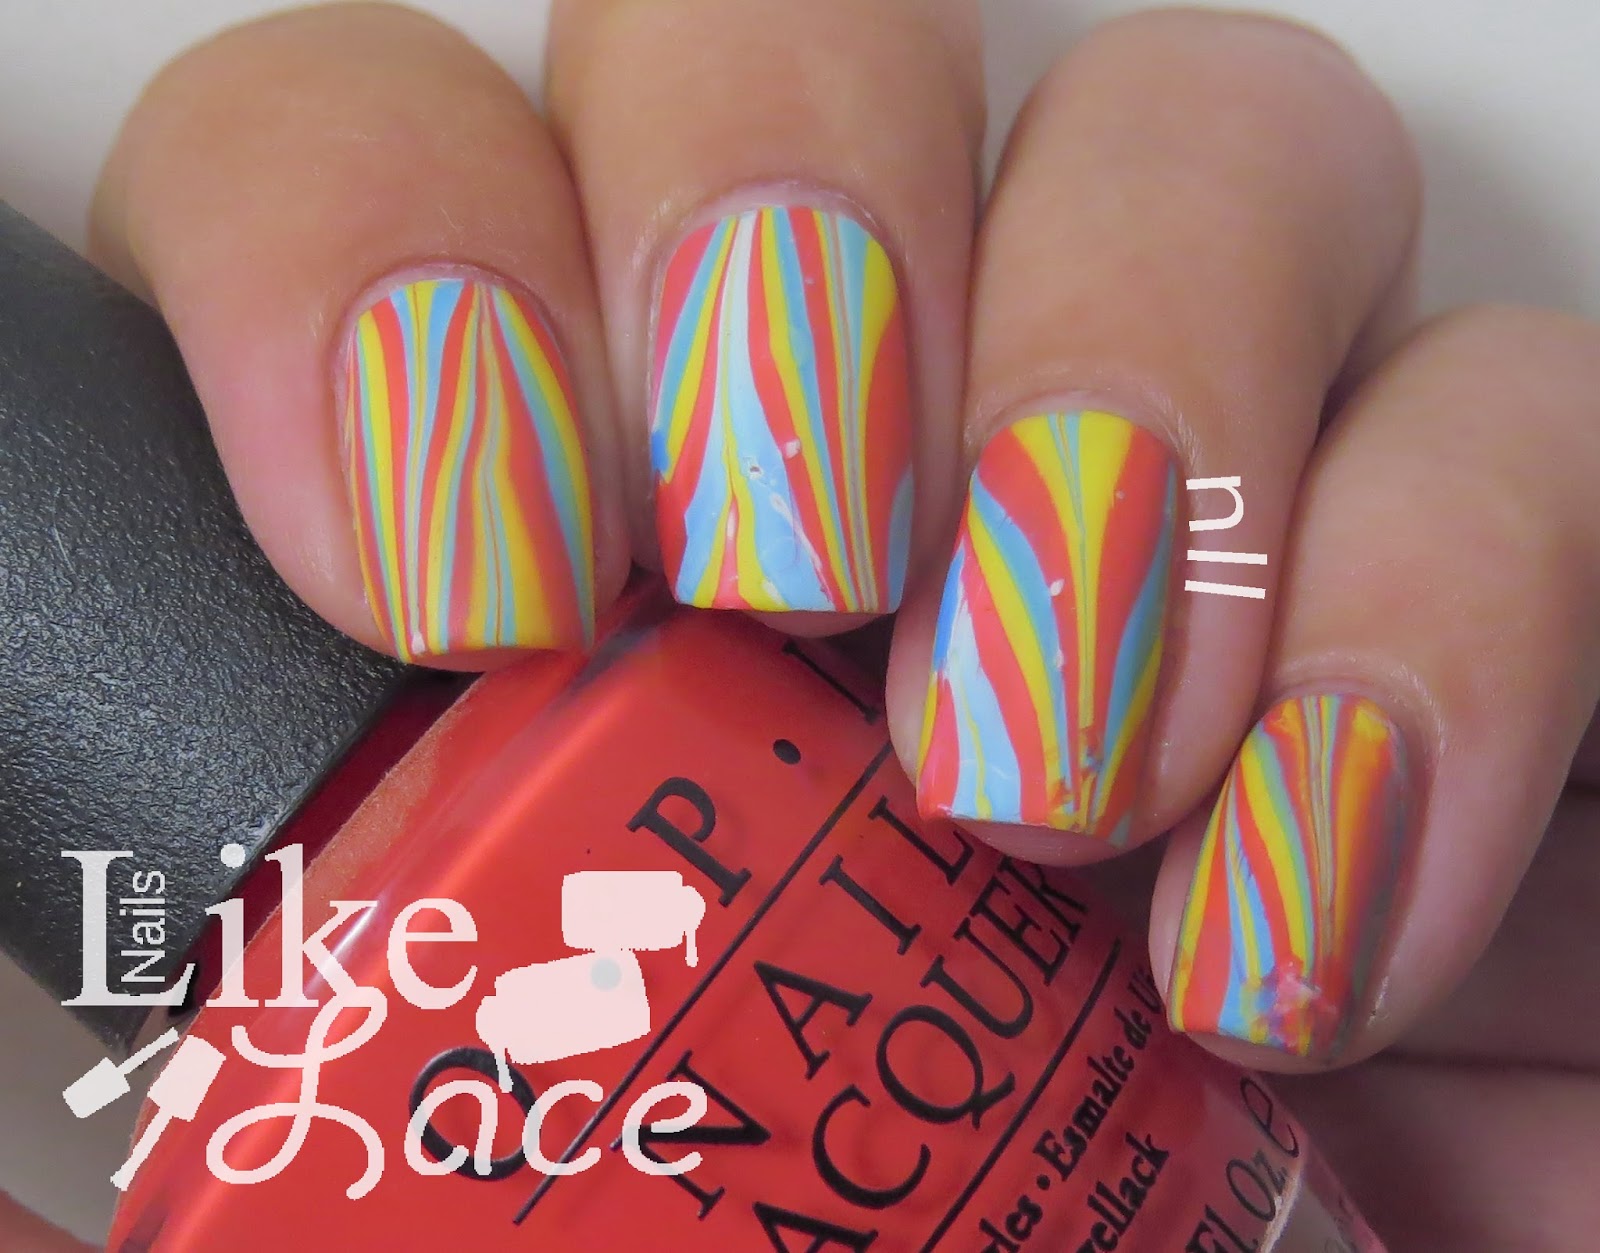 NailsLikeLace: Primary Colors/Colombian-Inspired Water Marble